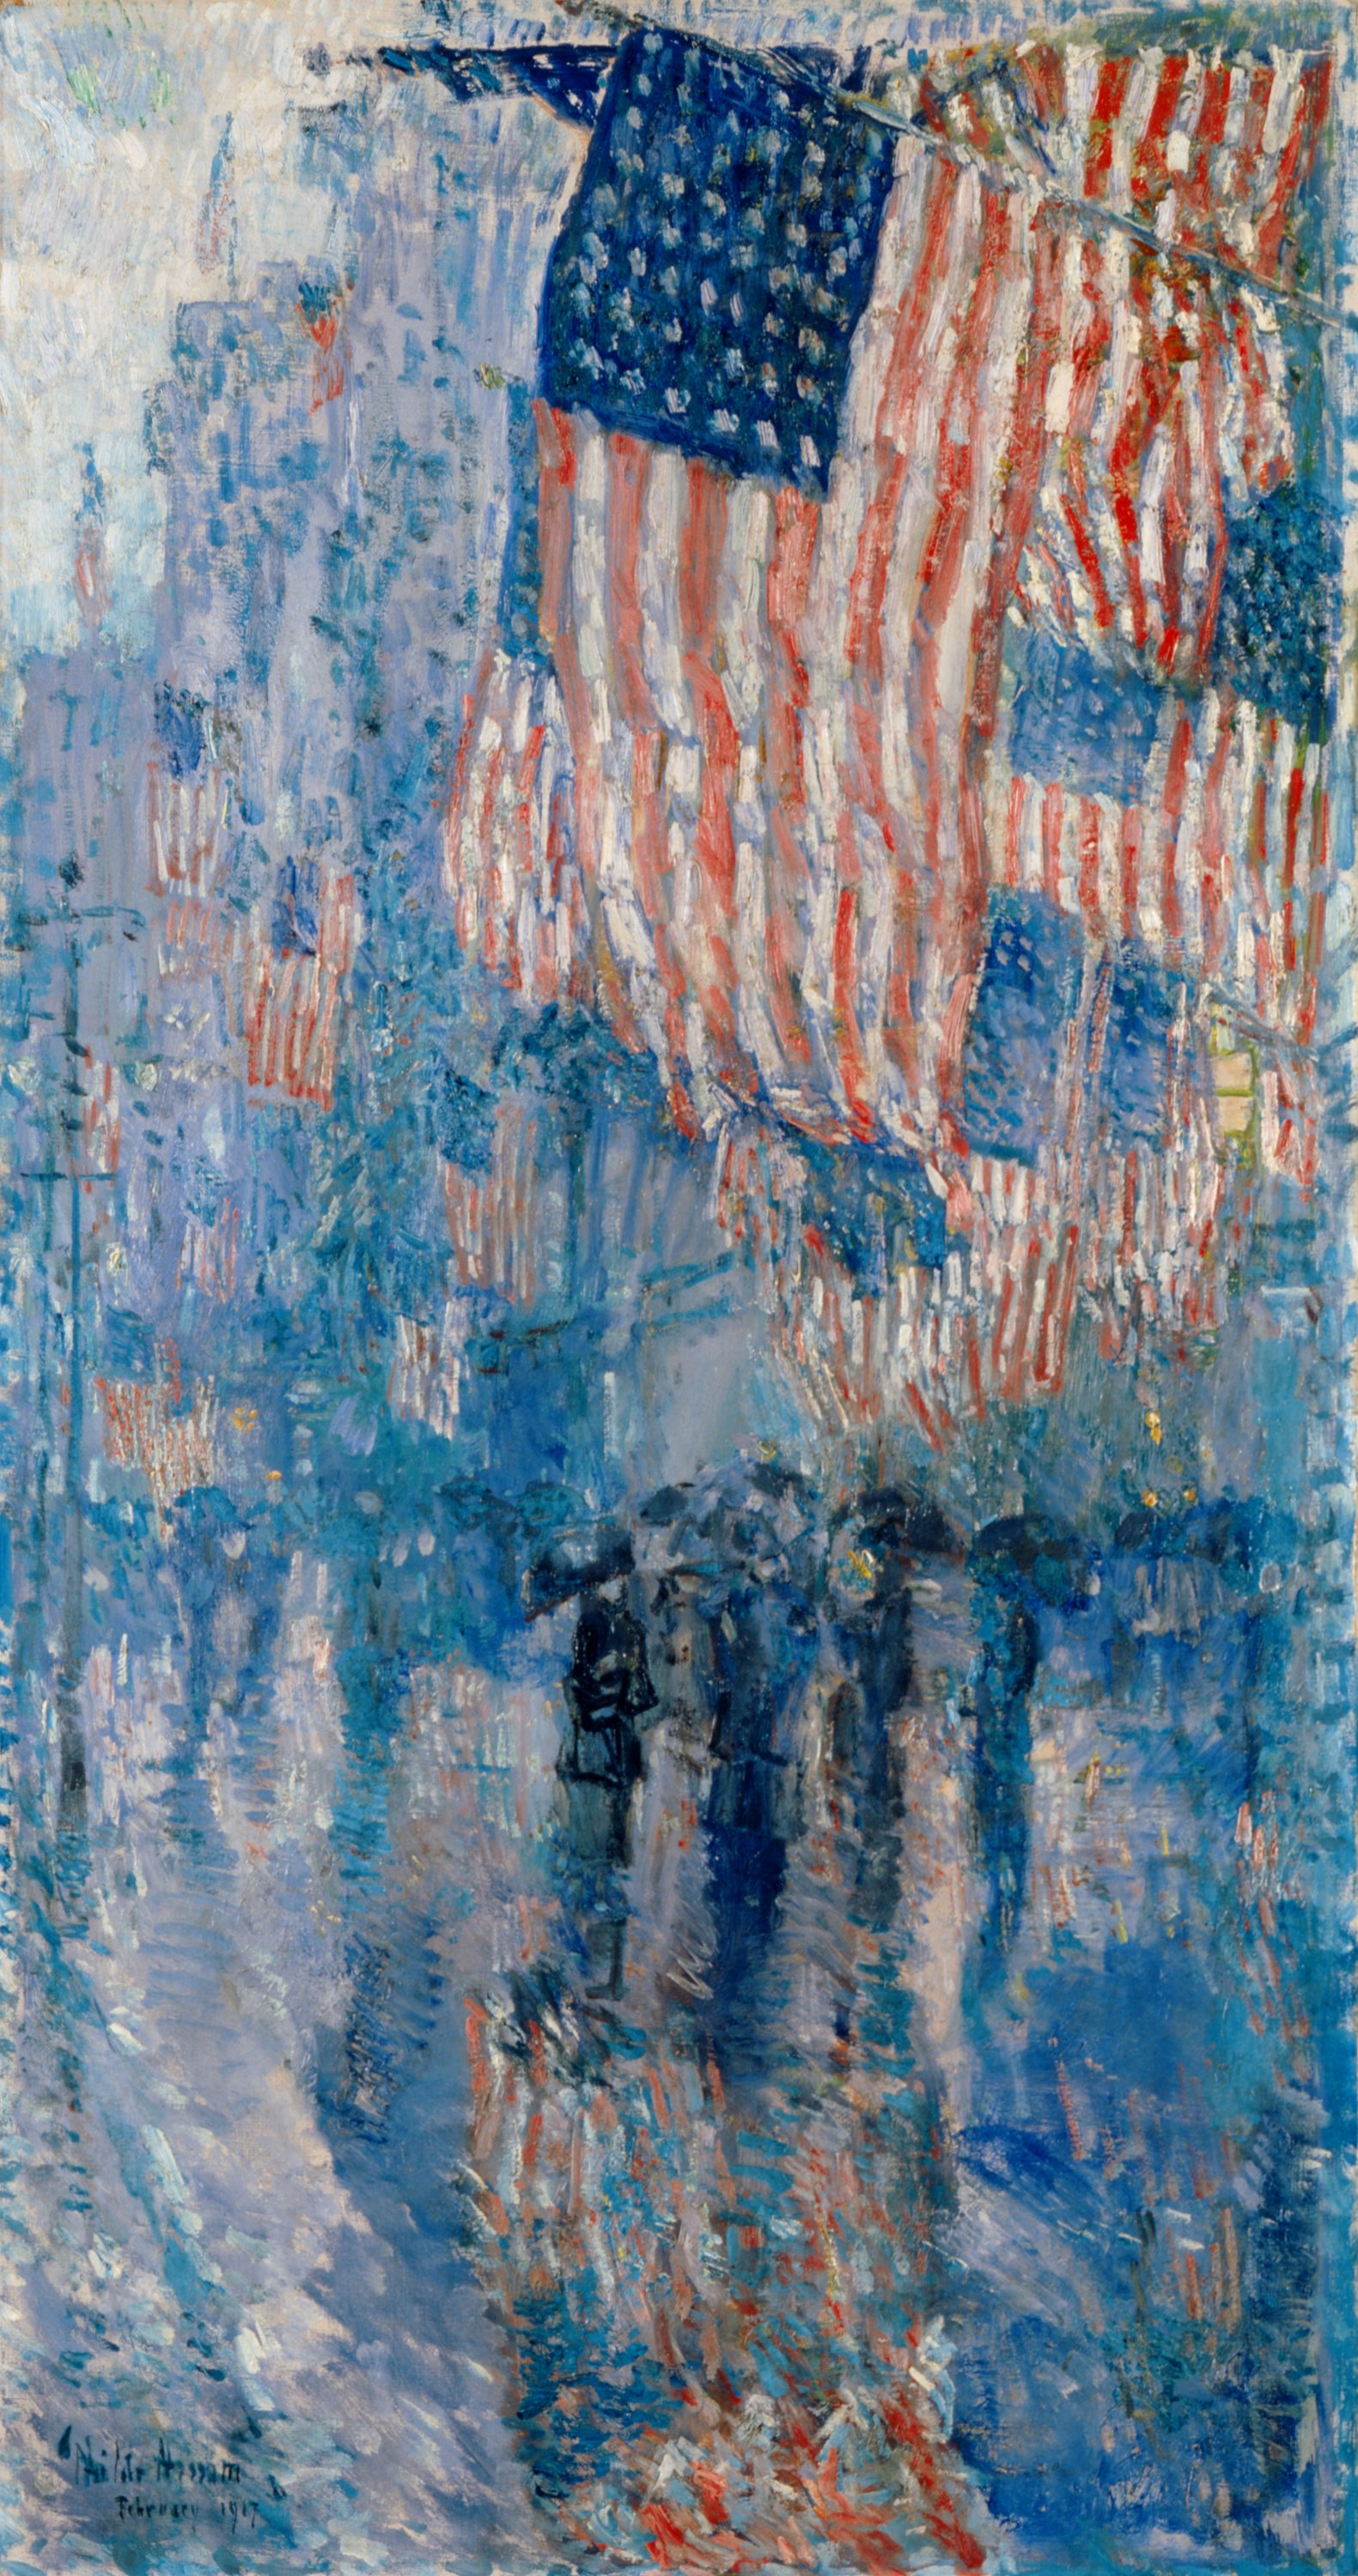 The Avenue in the Rain by Frederick Childe Hassam - 1917 - 42 × 22 1/4 in The White House